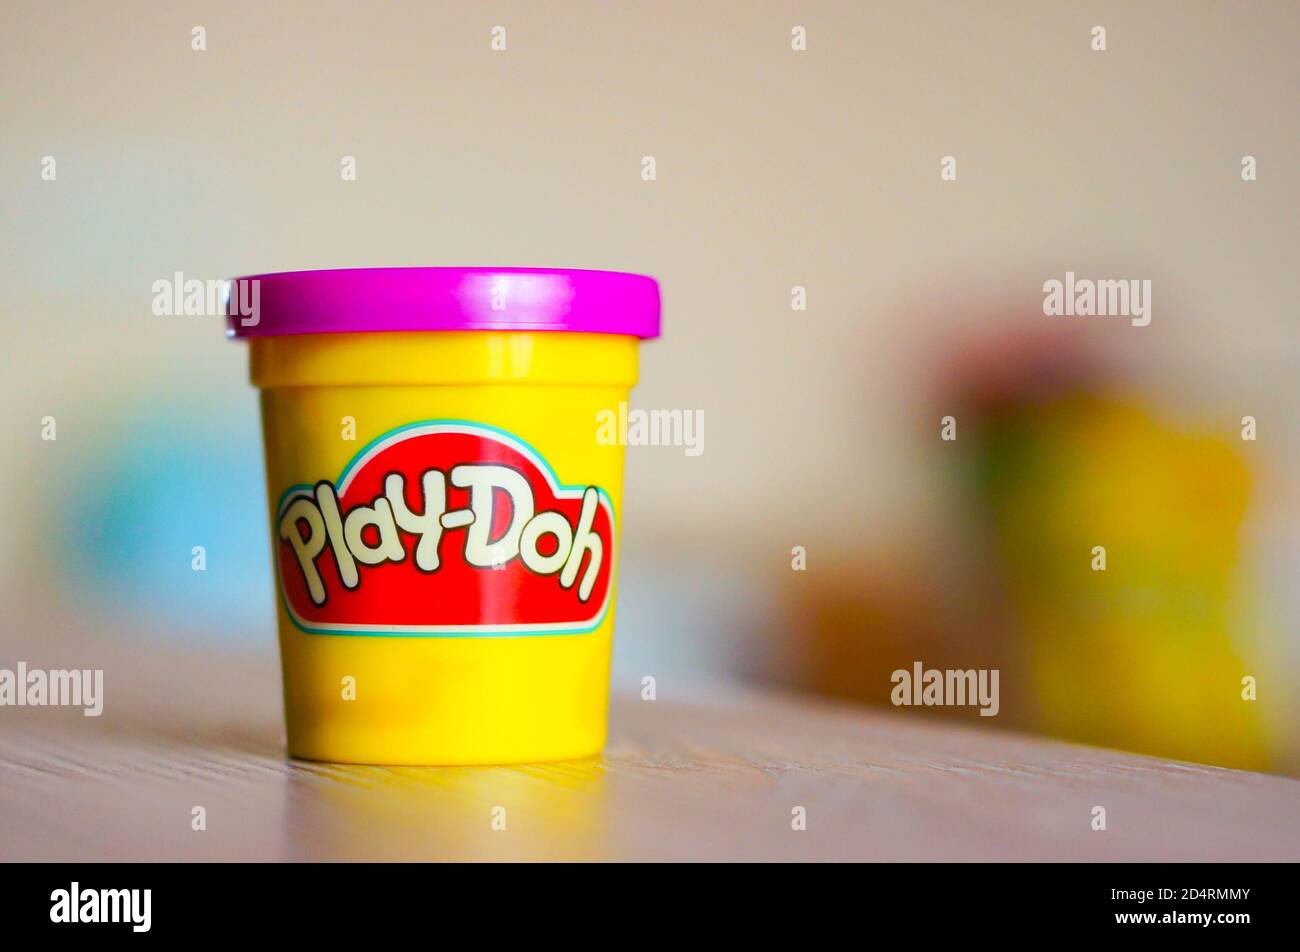 An opened plastic Play Doh container on a table Stock Photo - Alamy